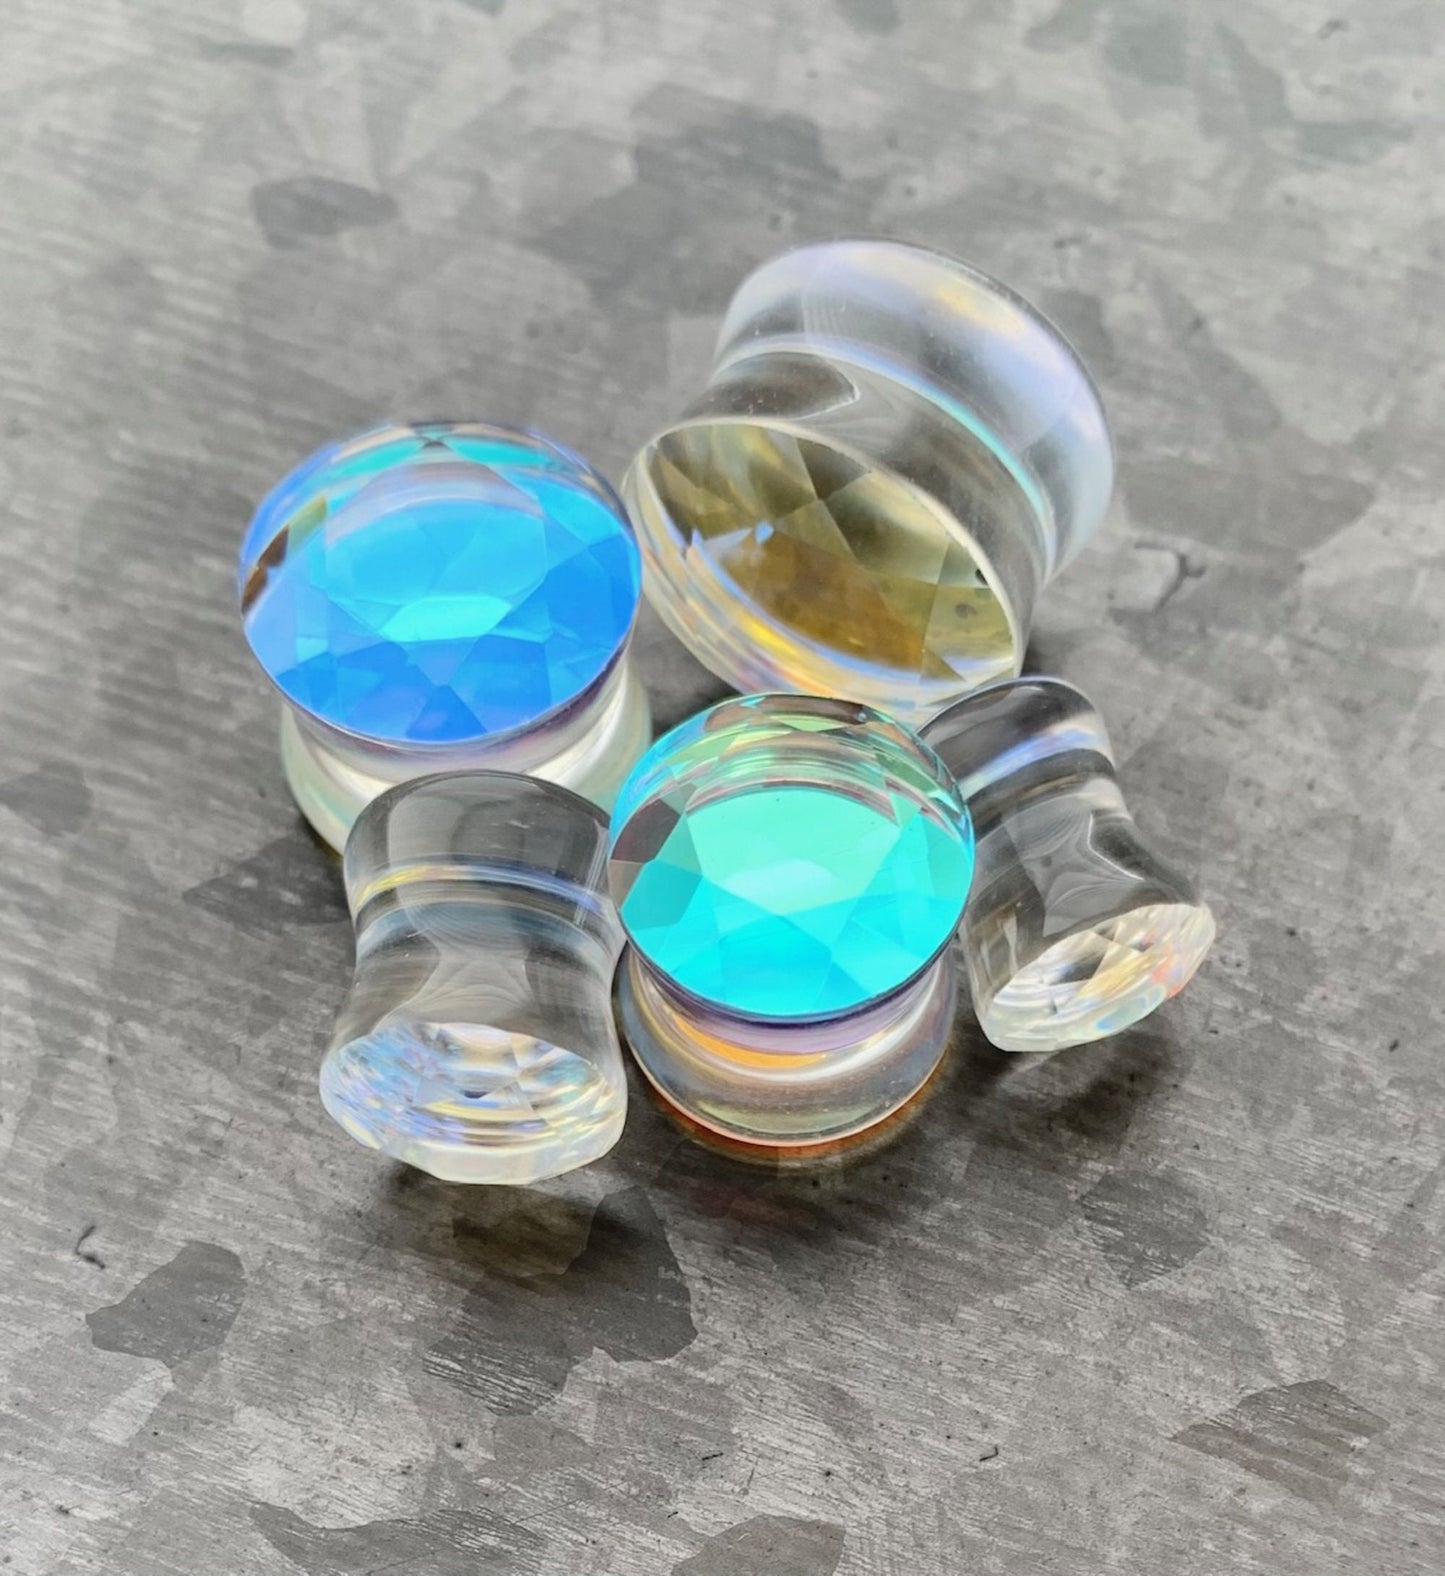 PAIR of Stunning Faceted Iridescent Glass Double Flare Plugs - Gauges 0g (8mm) through 5/8" (16mm) available!